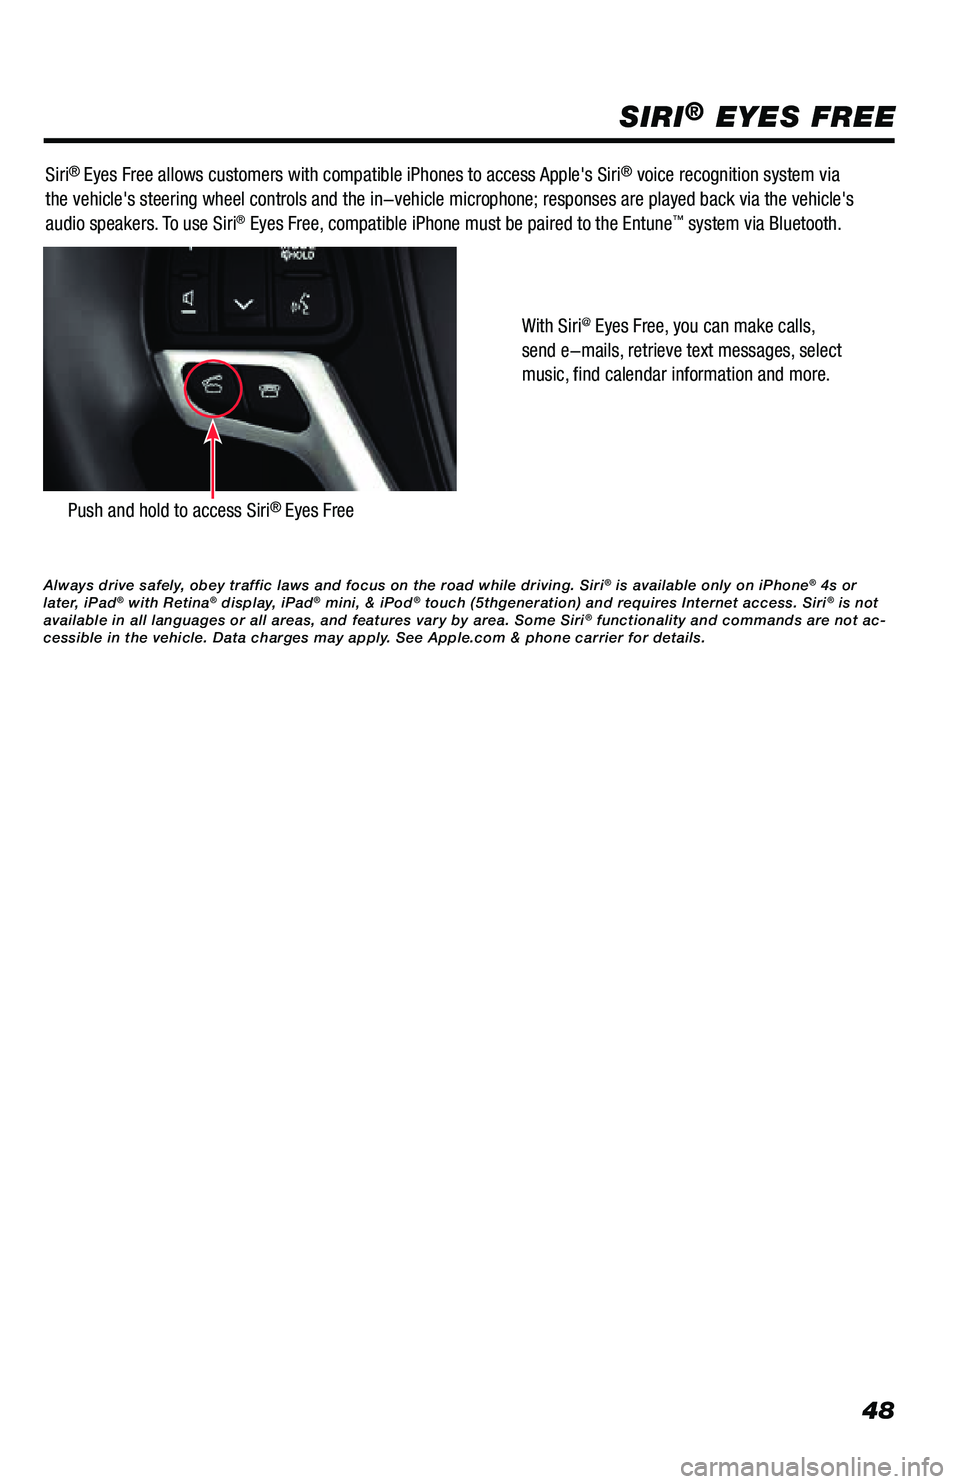 TOYOTA PRIUS PRIME 2019  Accessories, Audio & Navigation (in English) 48
SIRI® EYES FREE
Siri® Eyes Free allows customers with compatible iPhones to access Apple's Siri® voice recognition system via 
the vehicle's steering wheel controls and the in-vehicle mi